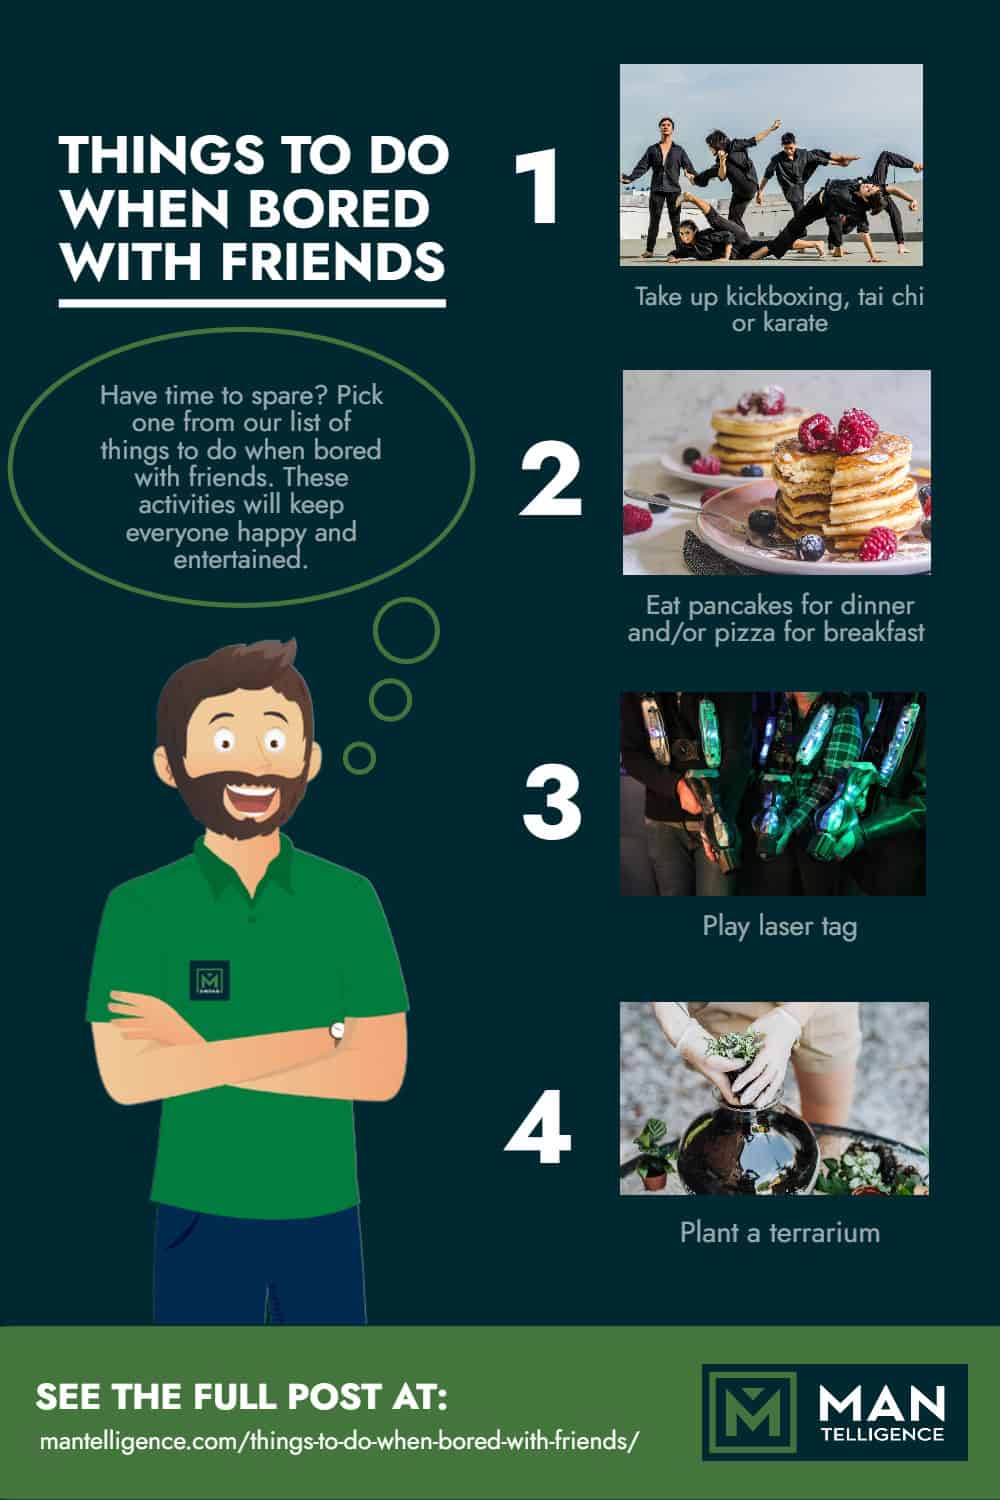 Things To Do When Bored With Friends - Infographic